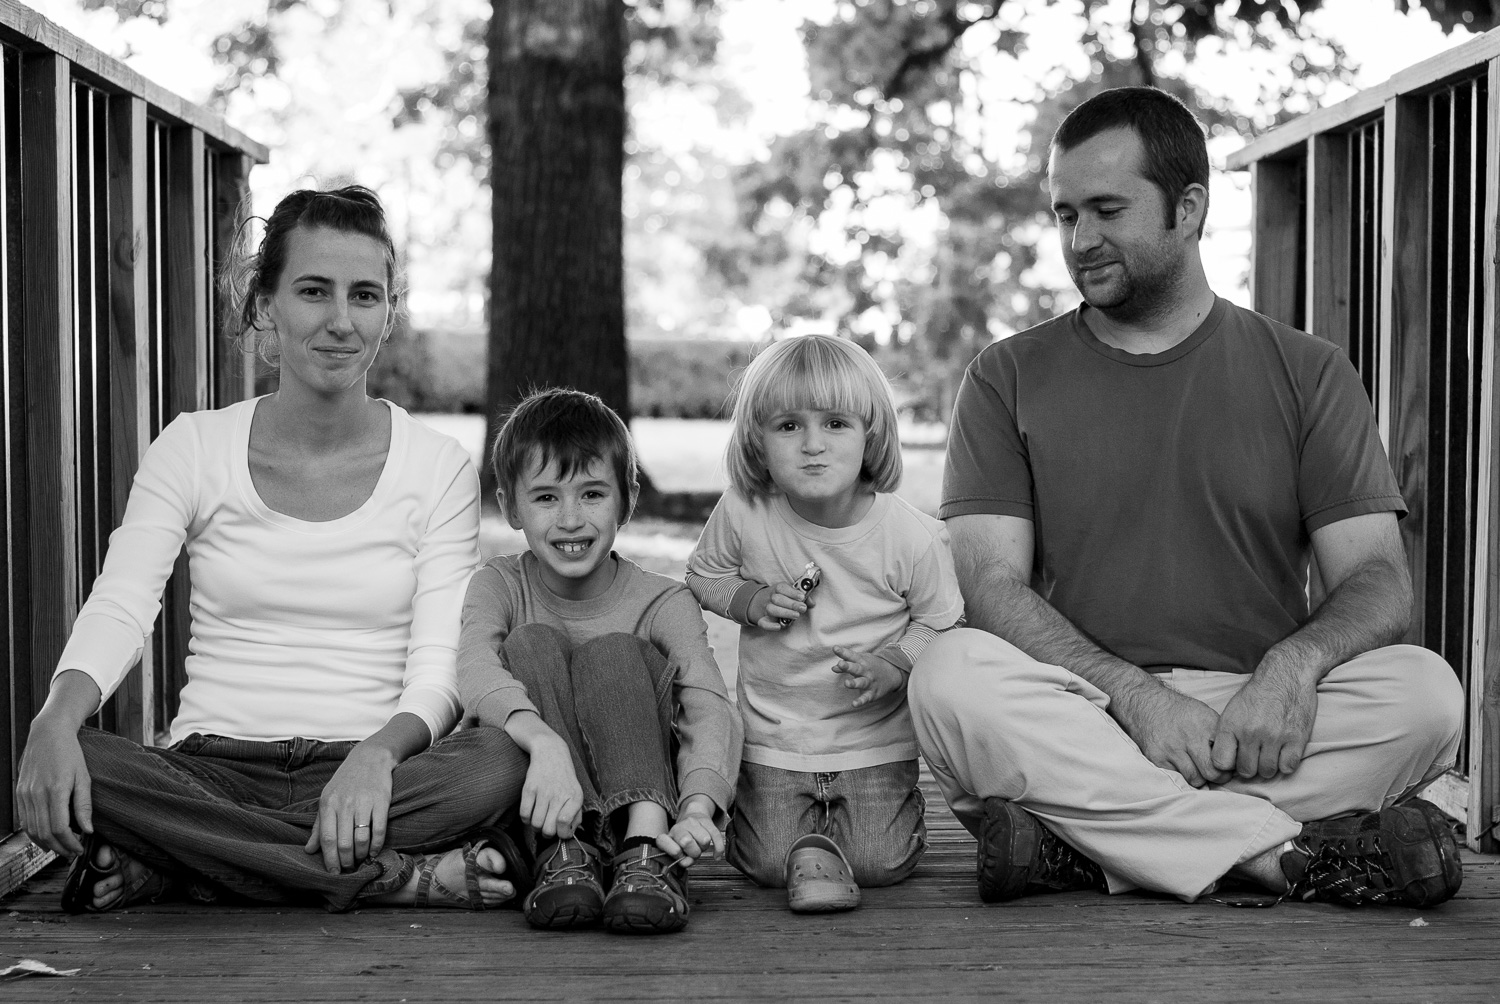 Black and white family photos. Two parents and their young children sitting cross-legged on a walking bridge.